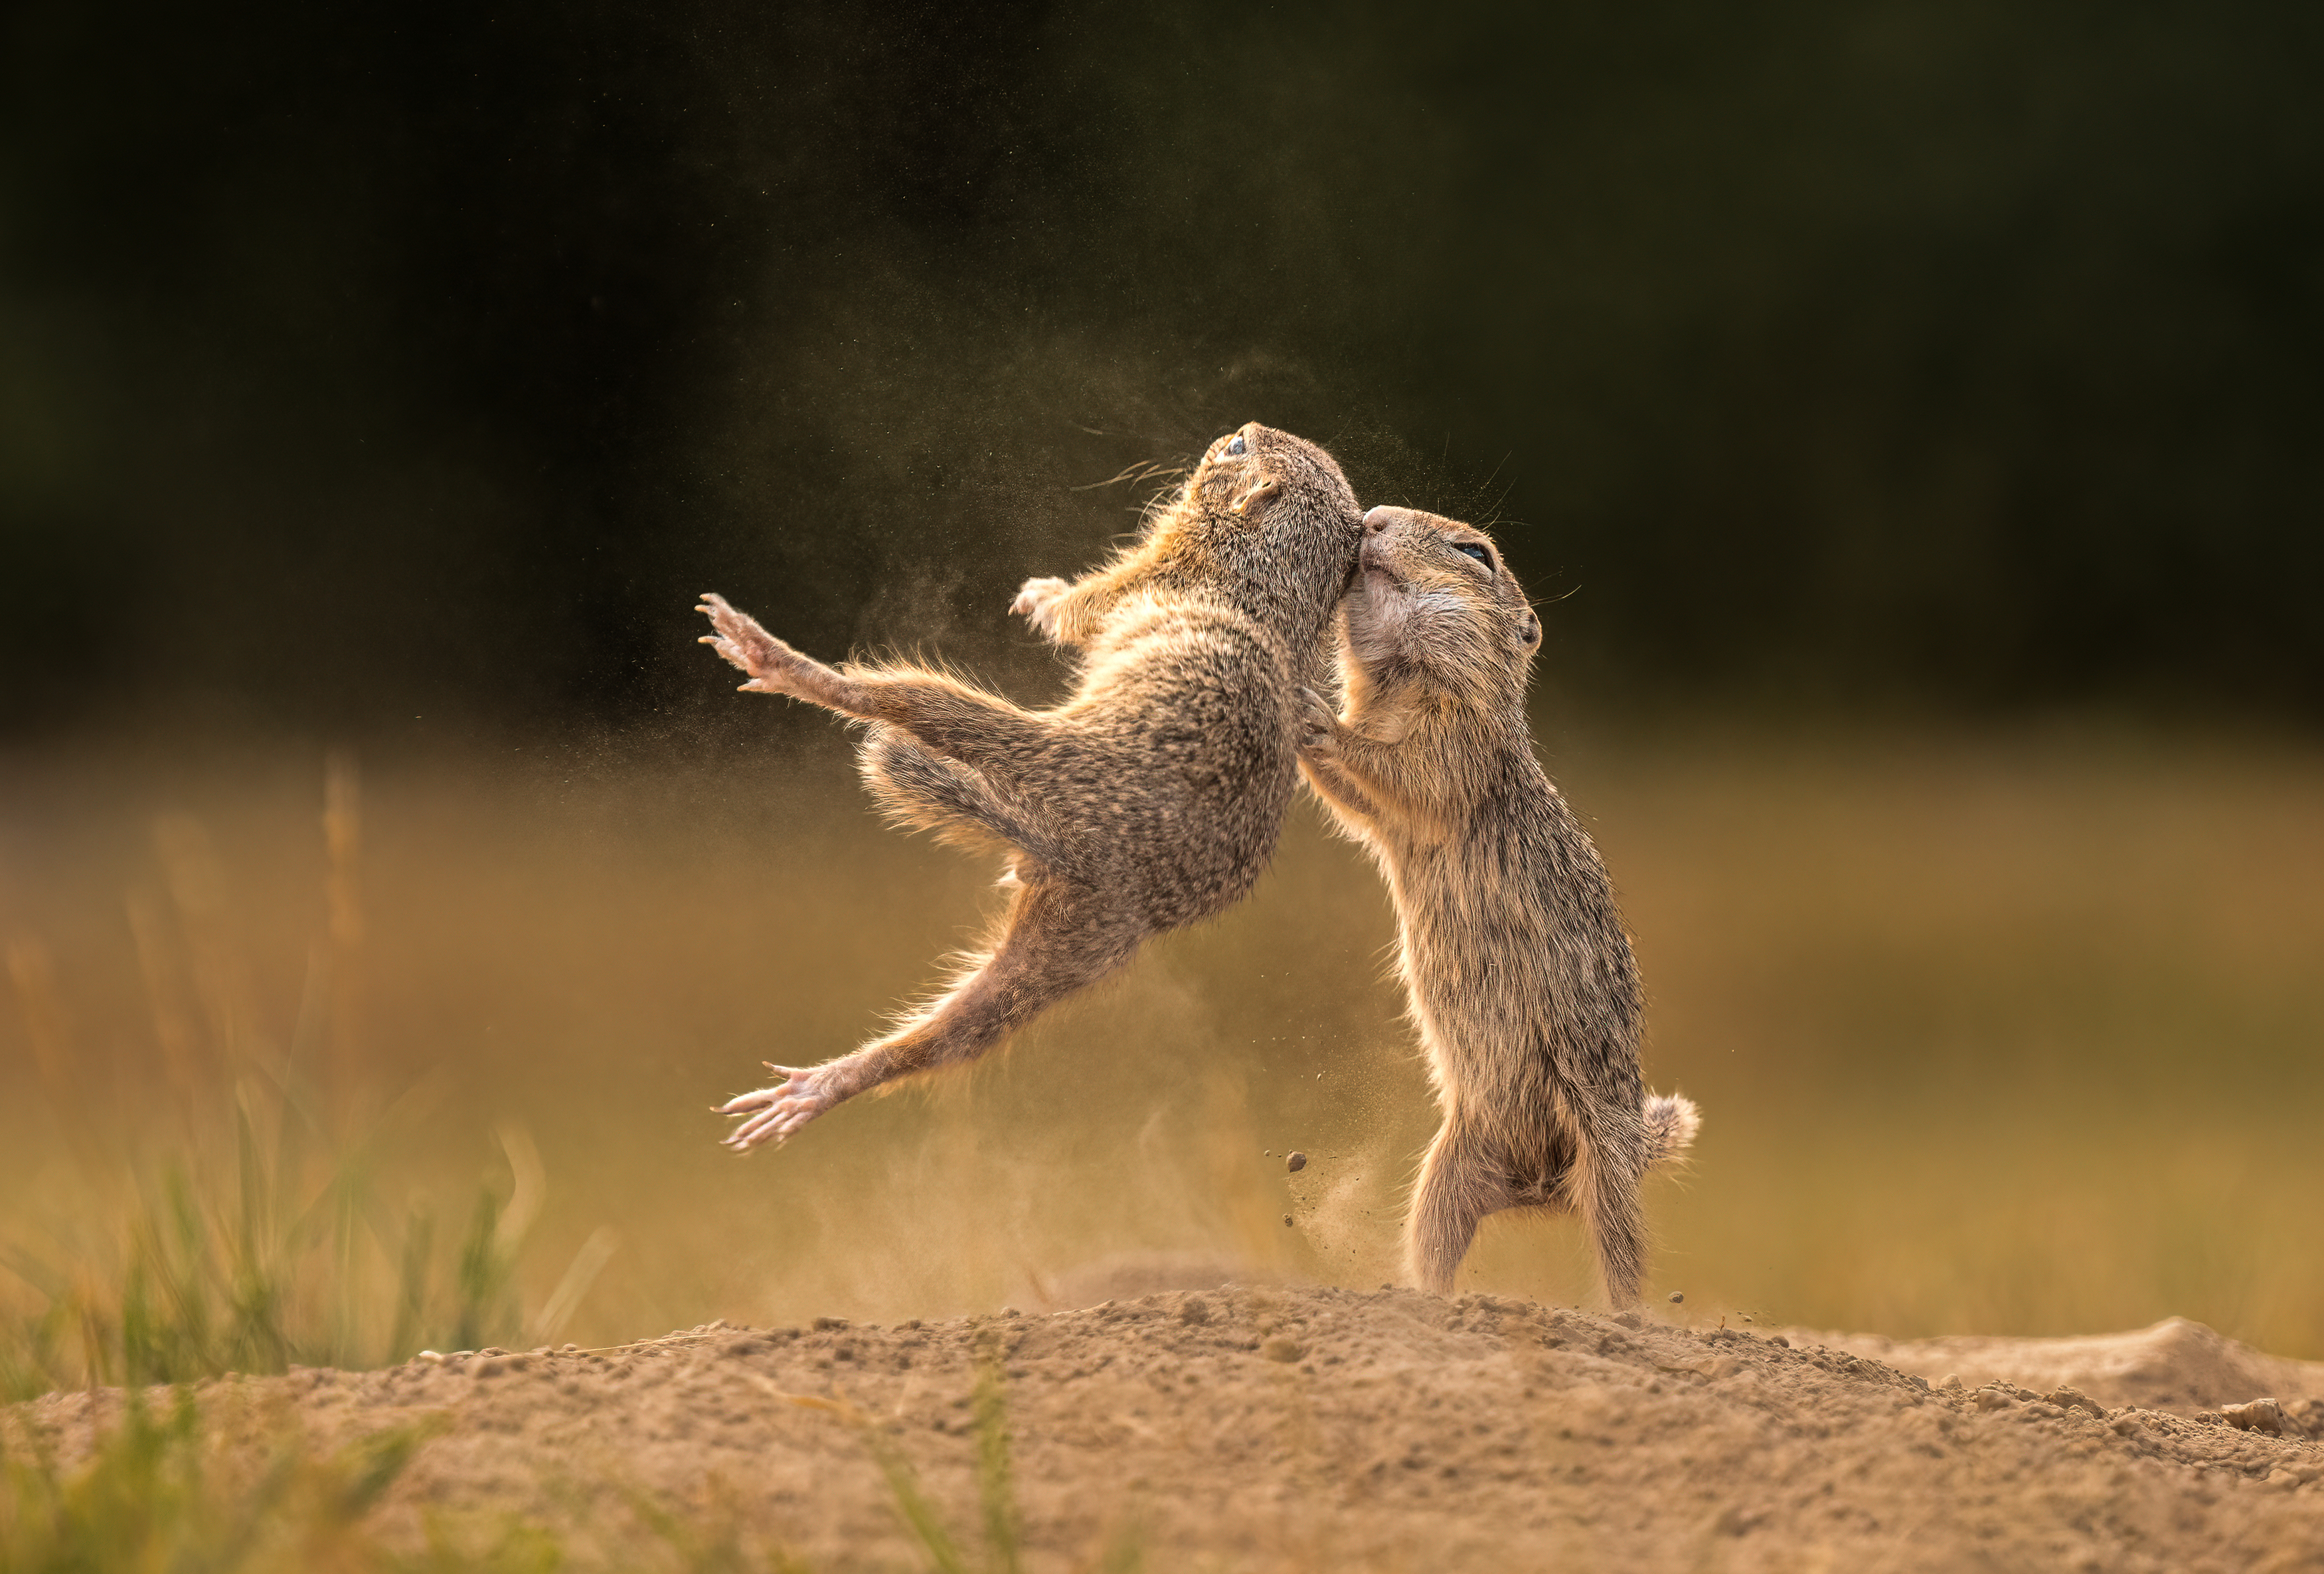 #groundsquirrel #fight #funny #comedy #nature #animals , Tímea Ambrus